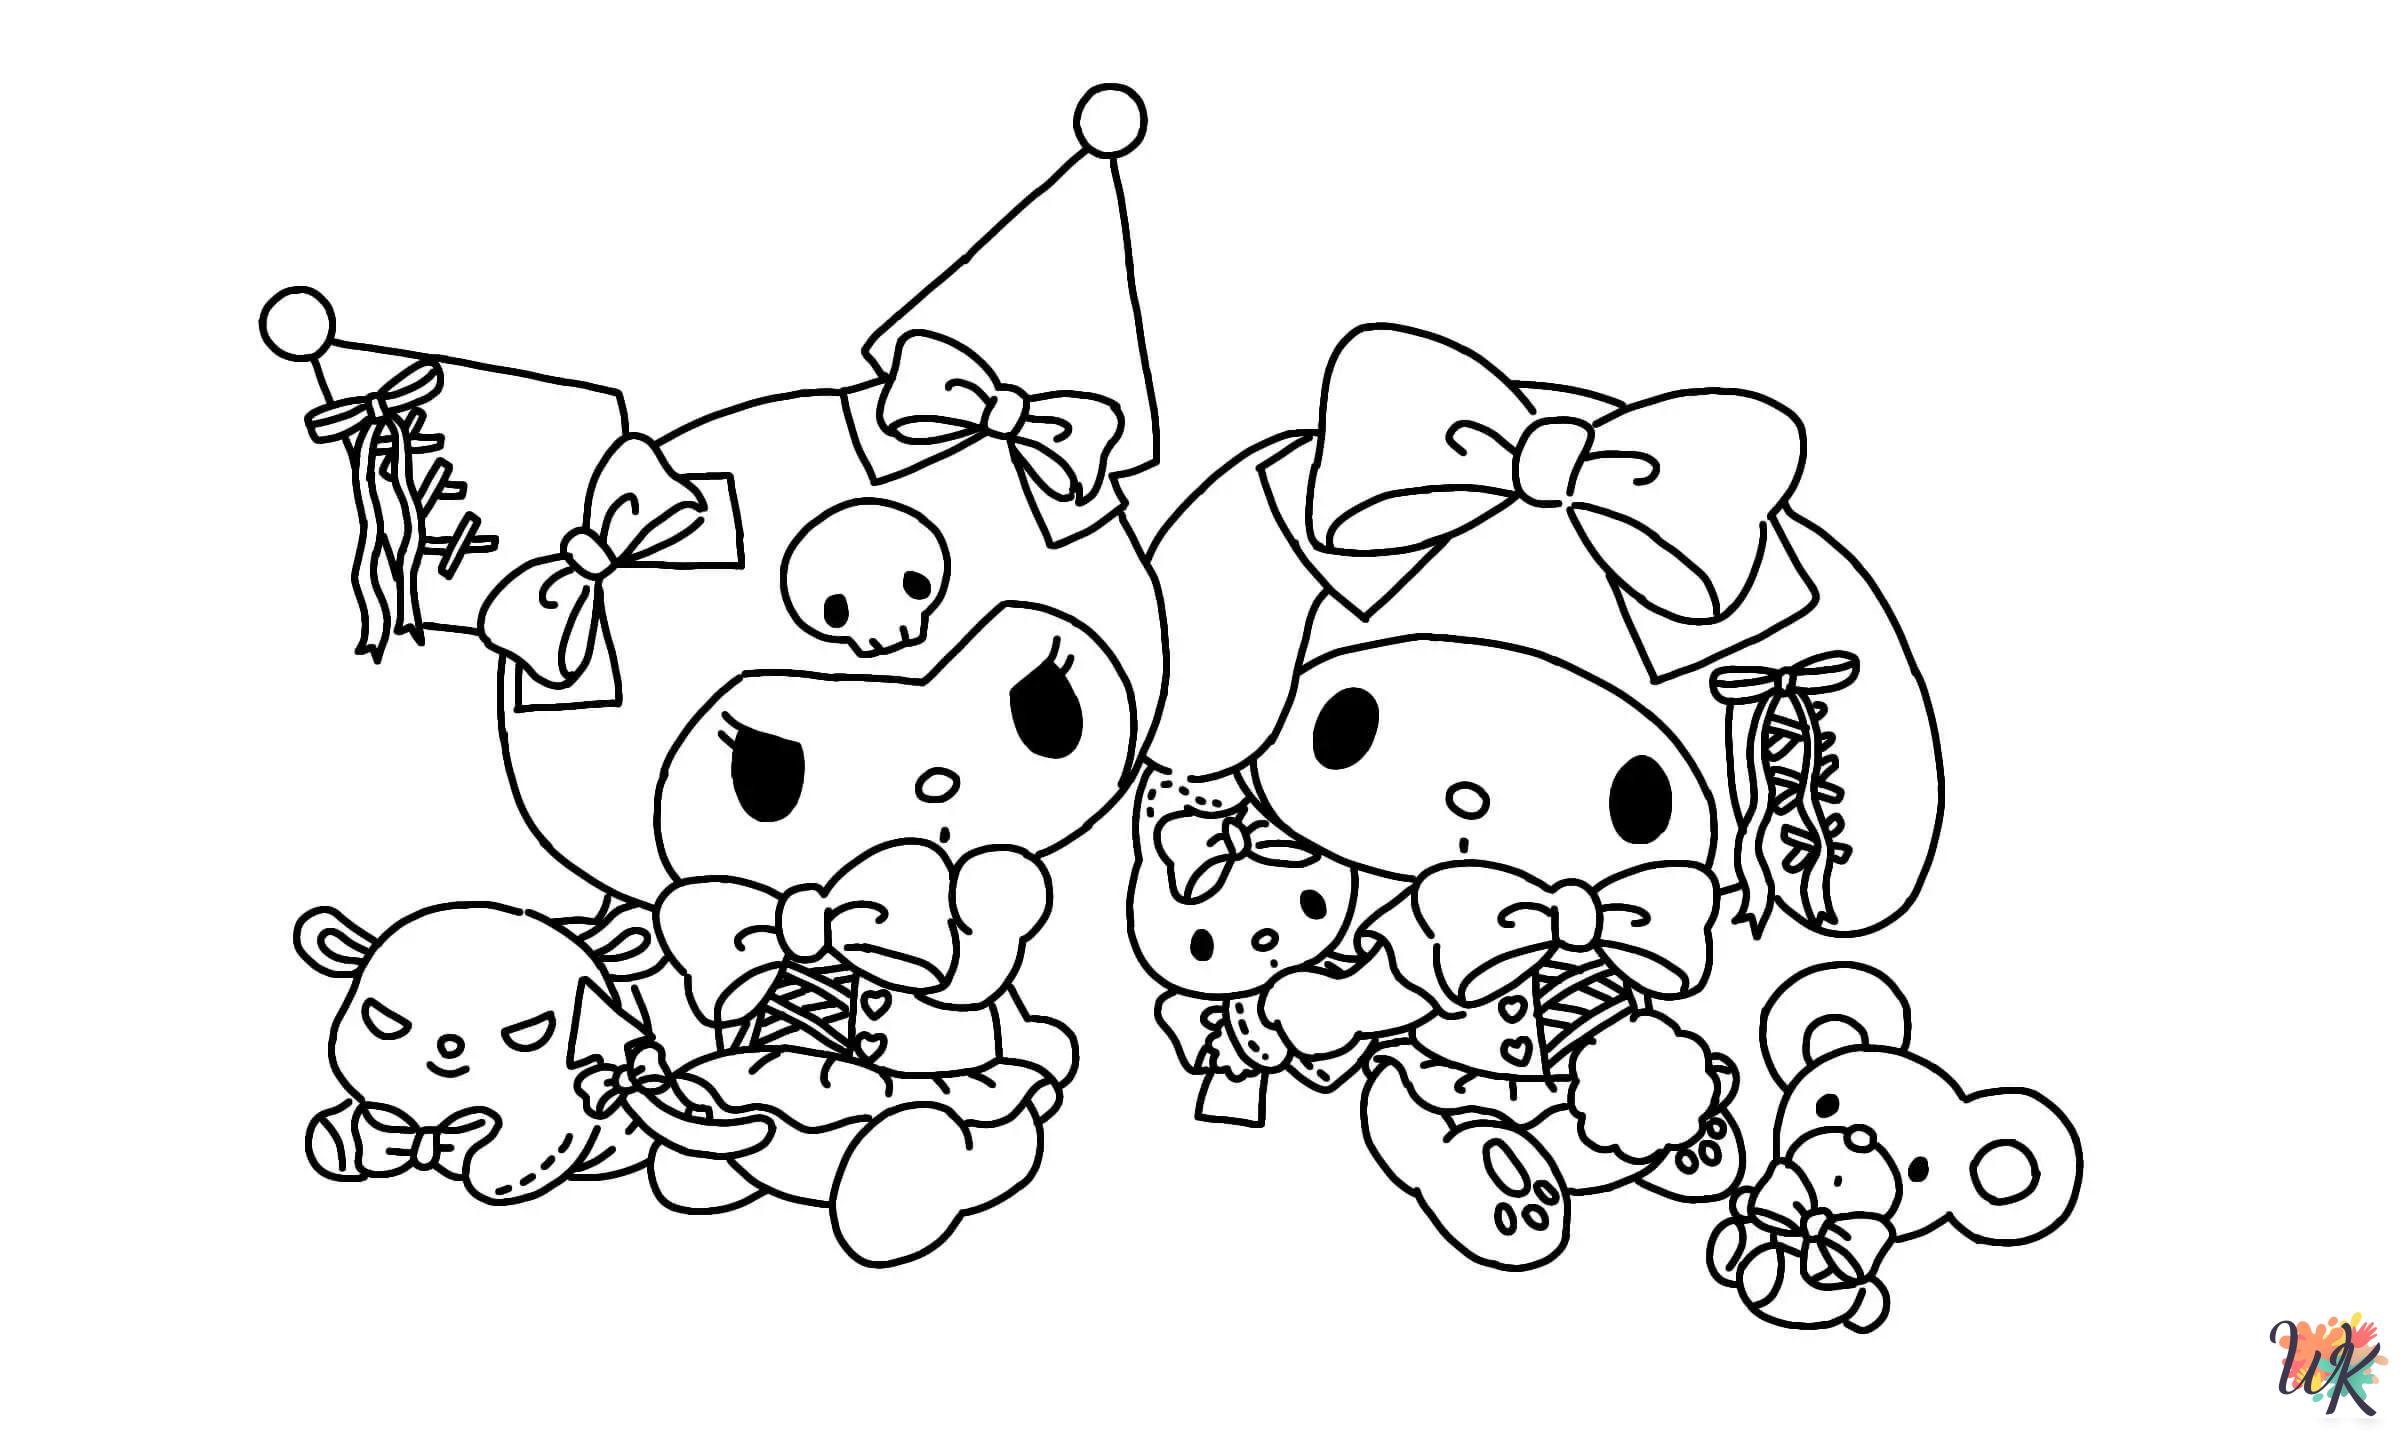 Sanrio ornaments coloring pages